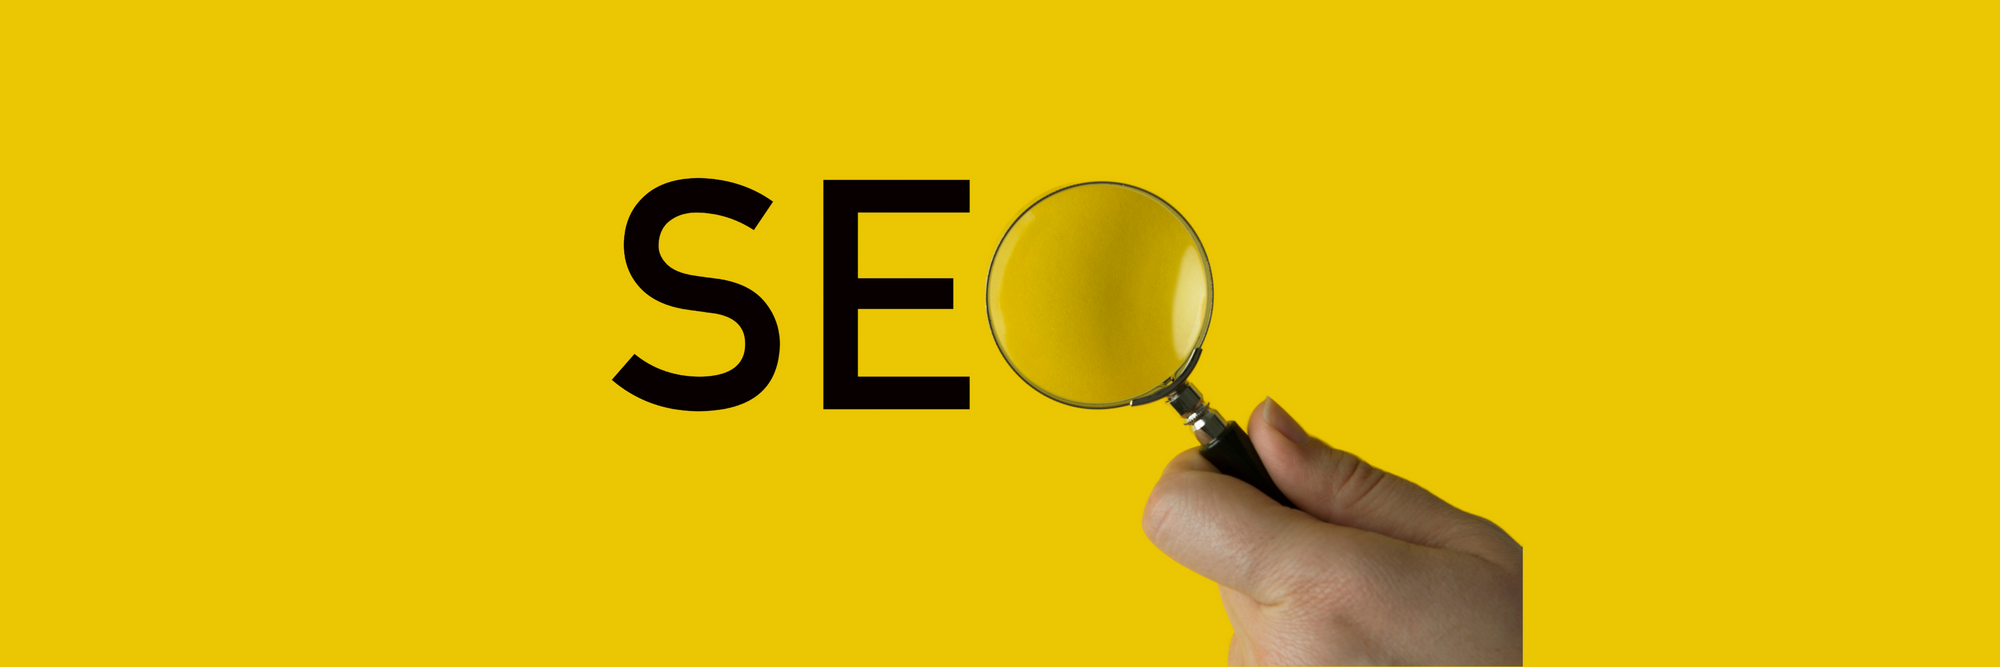 SEO Secrets That No-One Wants To Reveal-Tips & Tricks